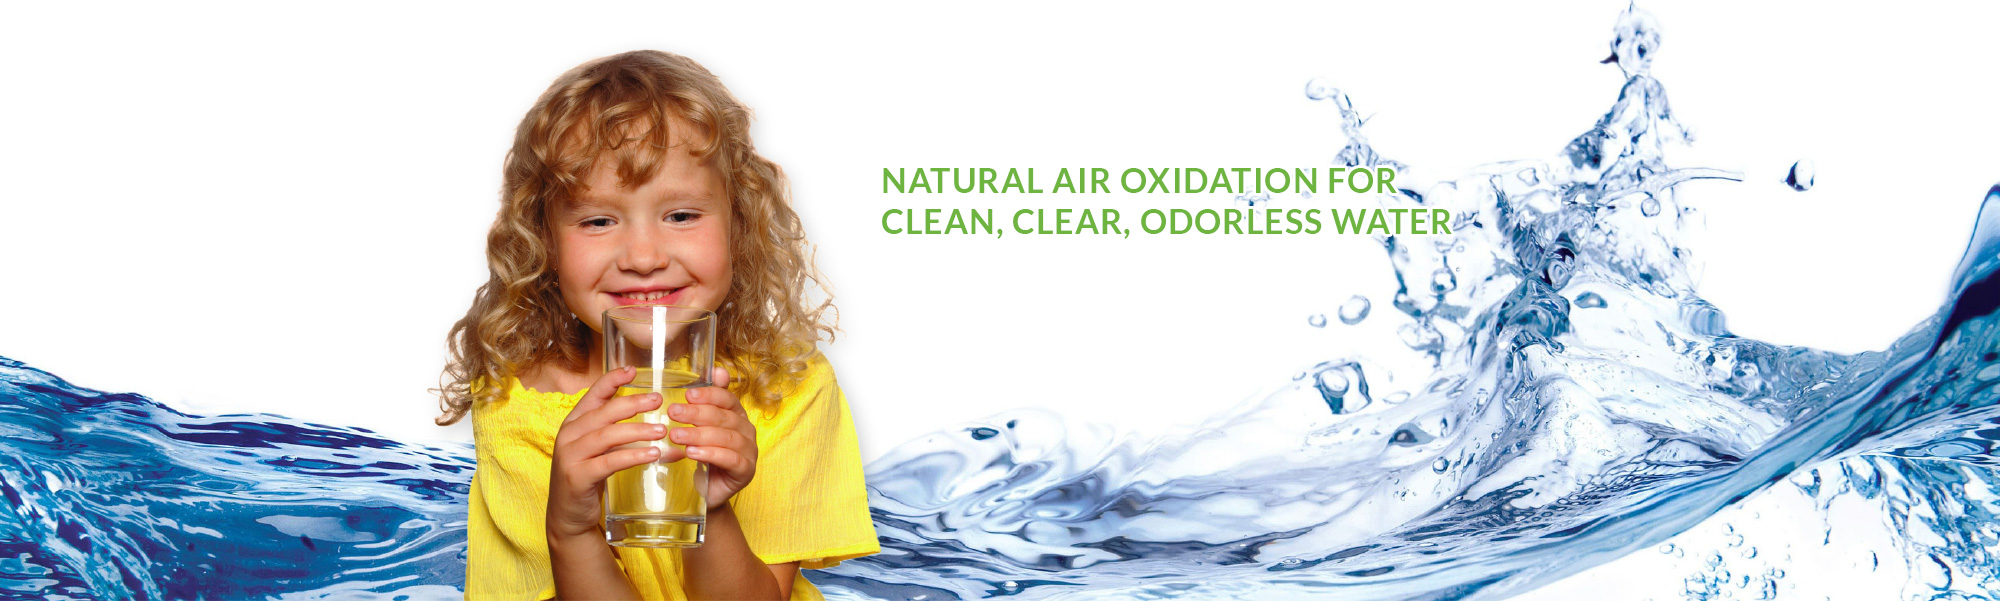 Natural air oxidation for clean, clear, odorless water